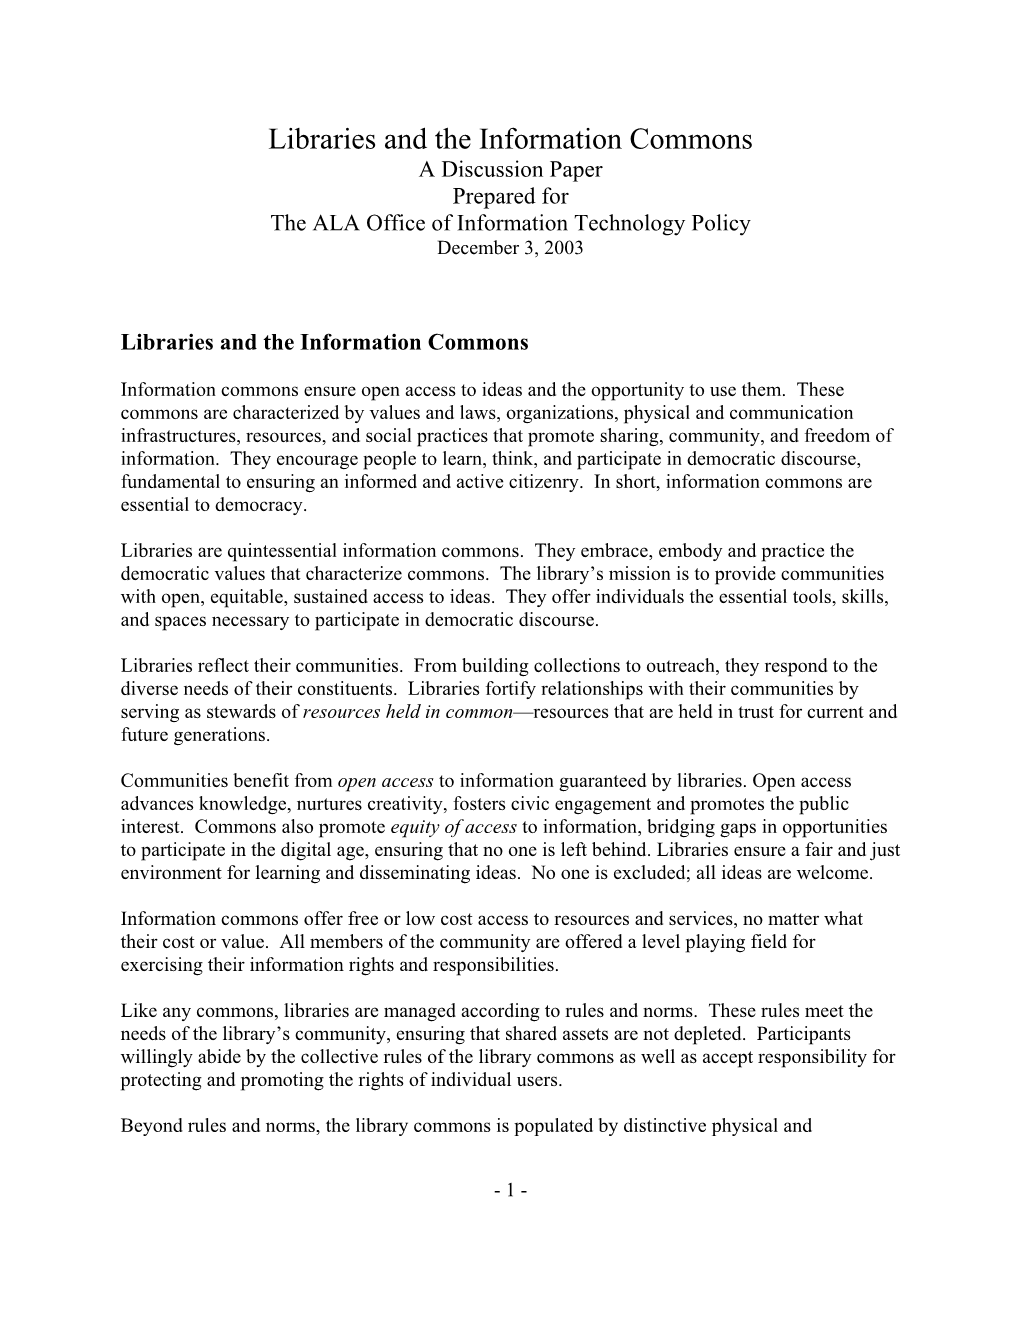 A Discussion Paper for the Information Commons Subcommittee